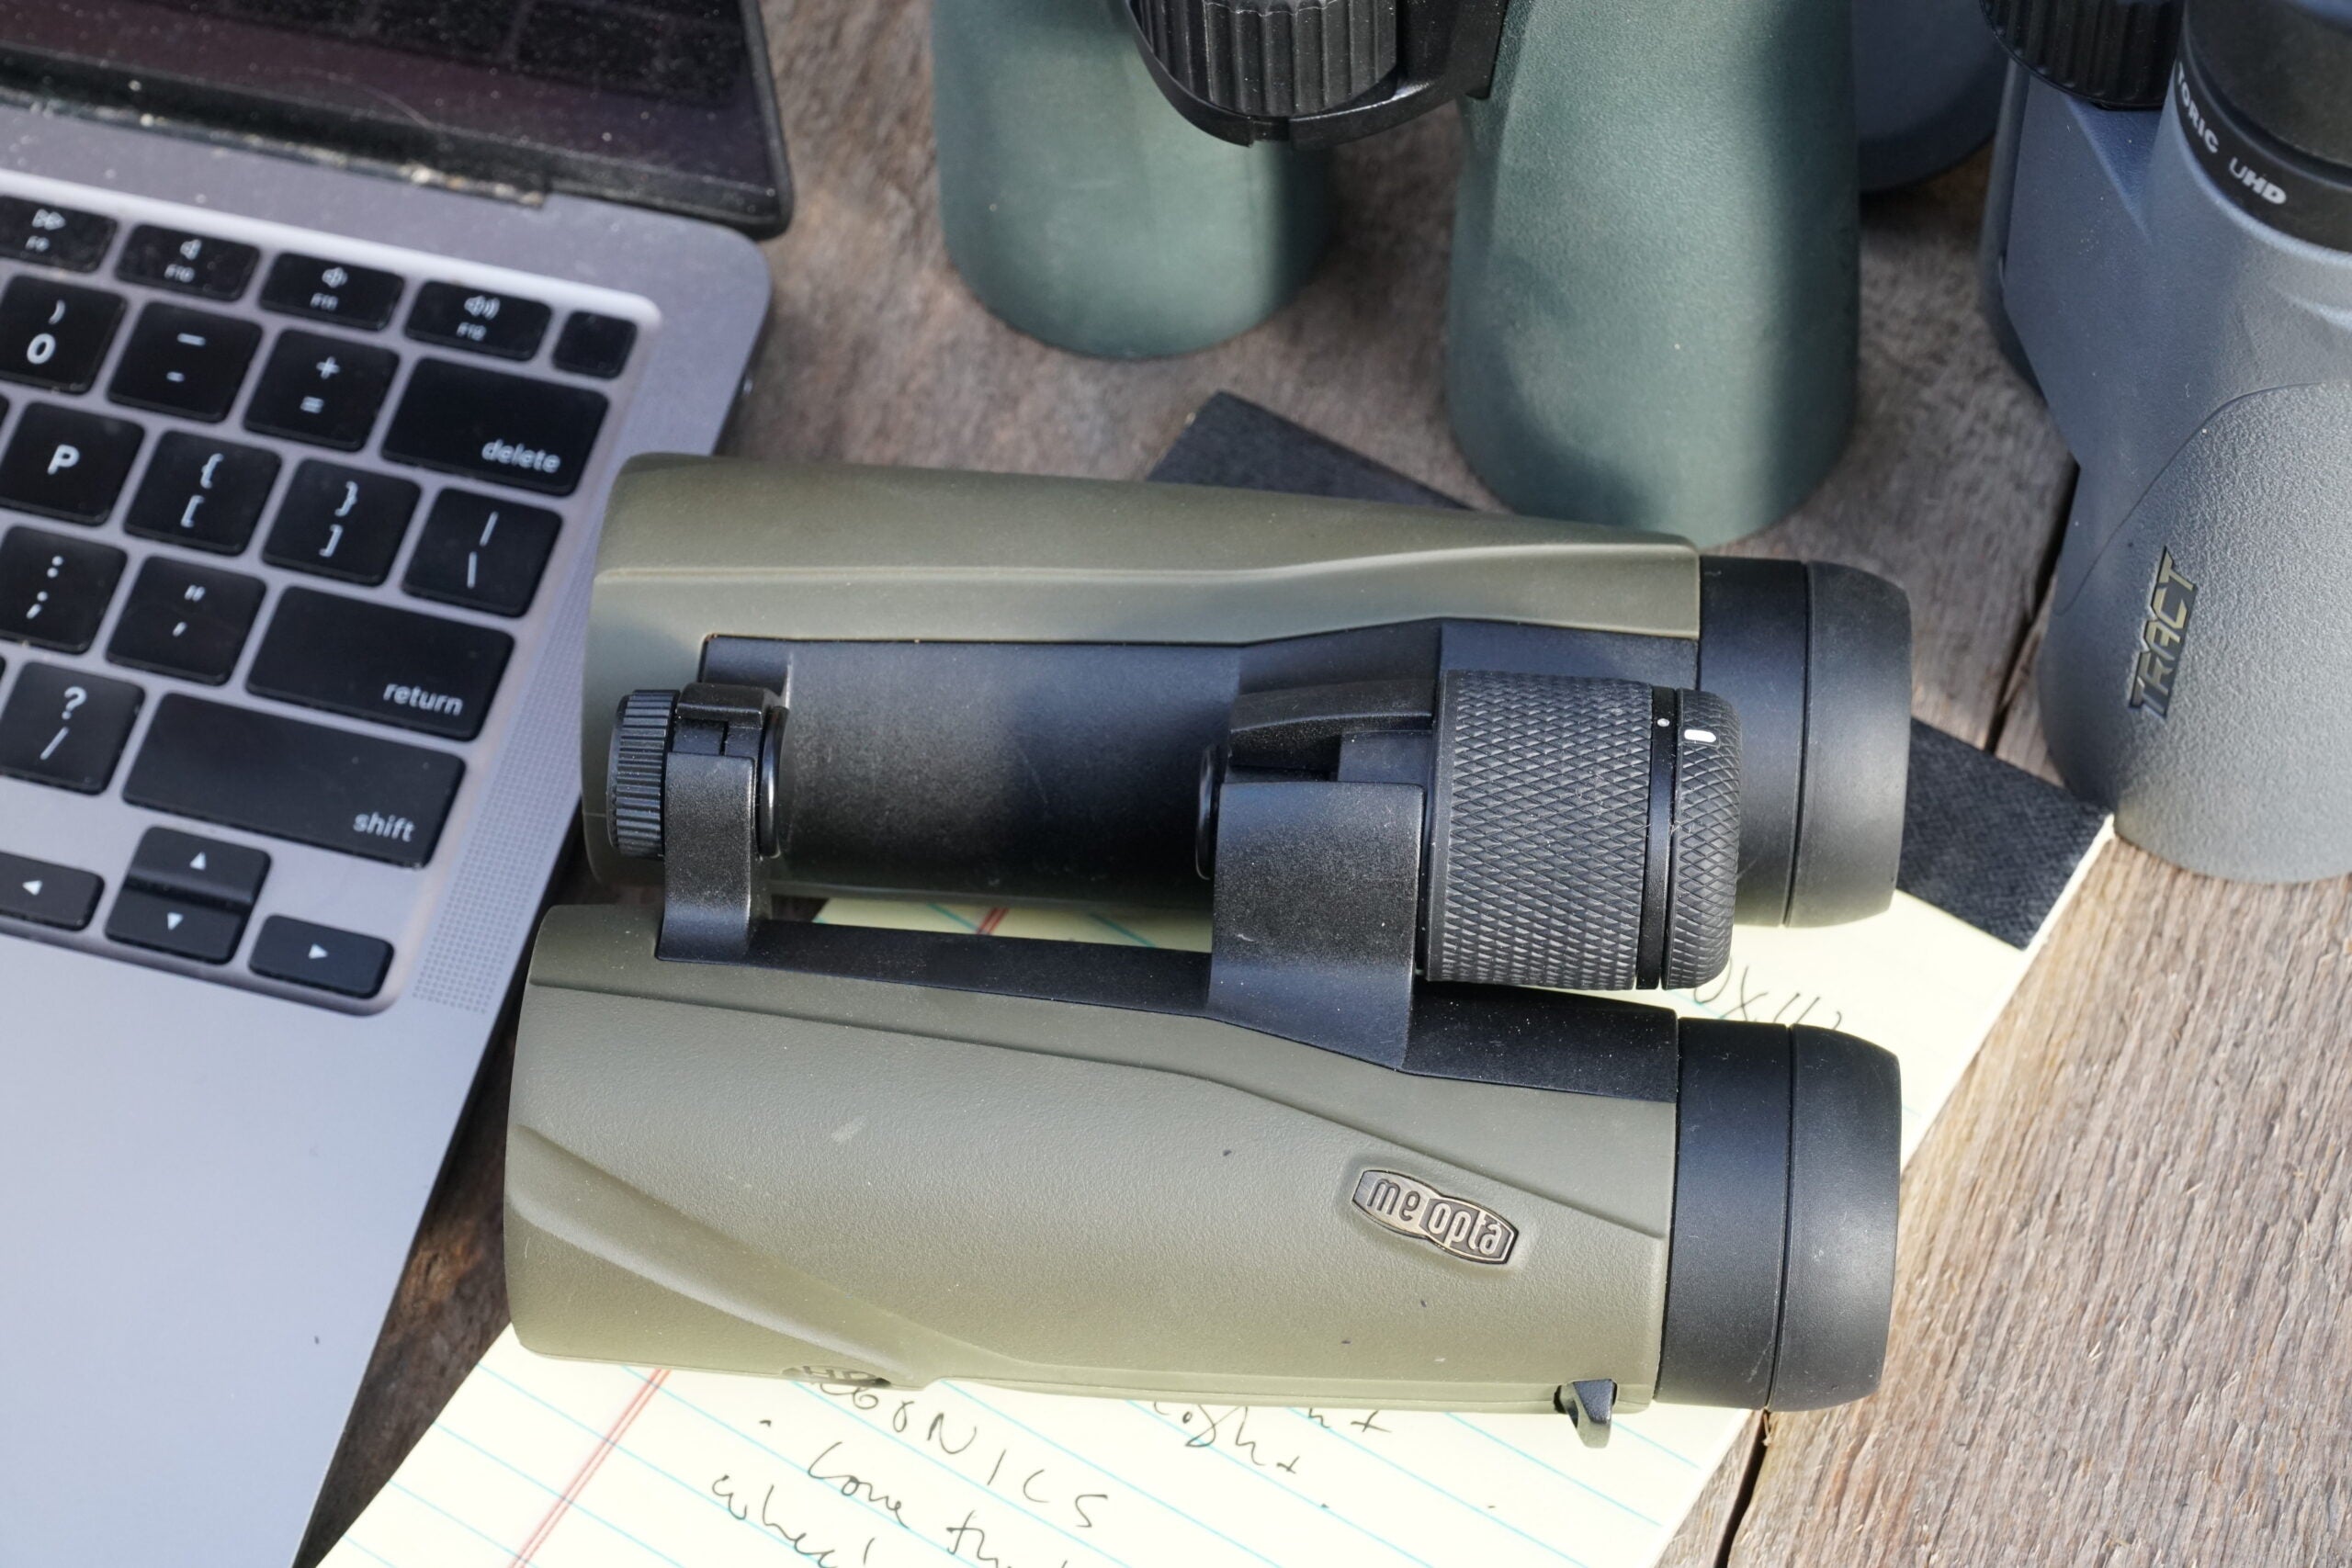 Meopta binocular lying on a table with a notepad, computer, and other binoculars.